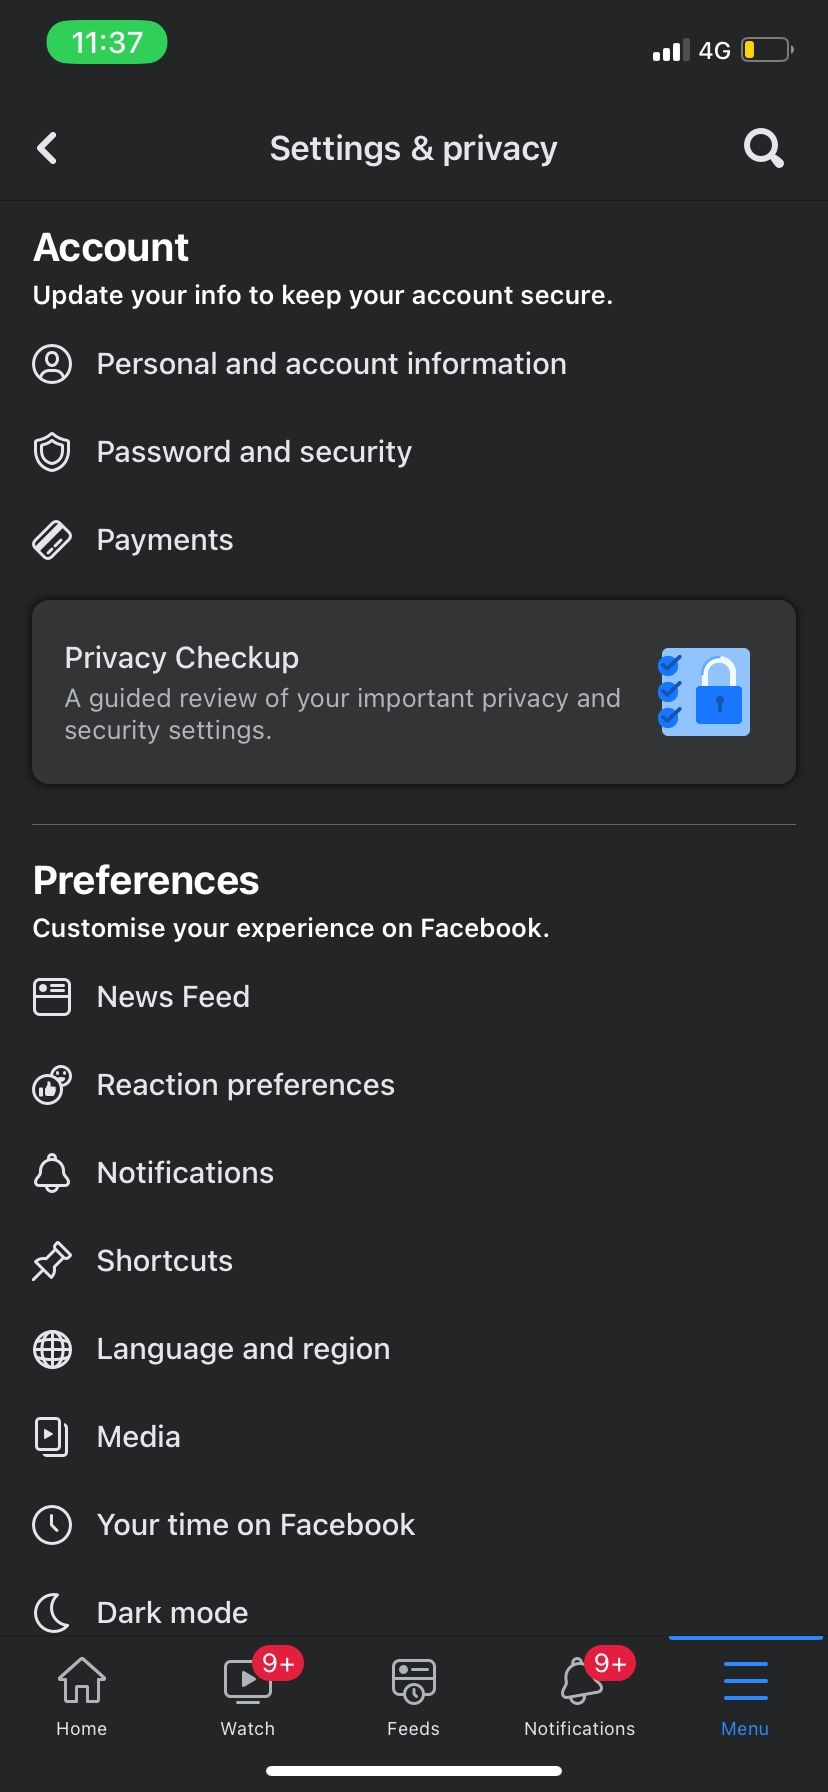 Facebook Settings and Privacy page on Mobile